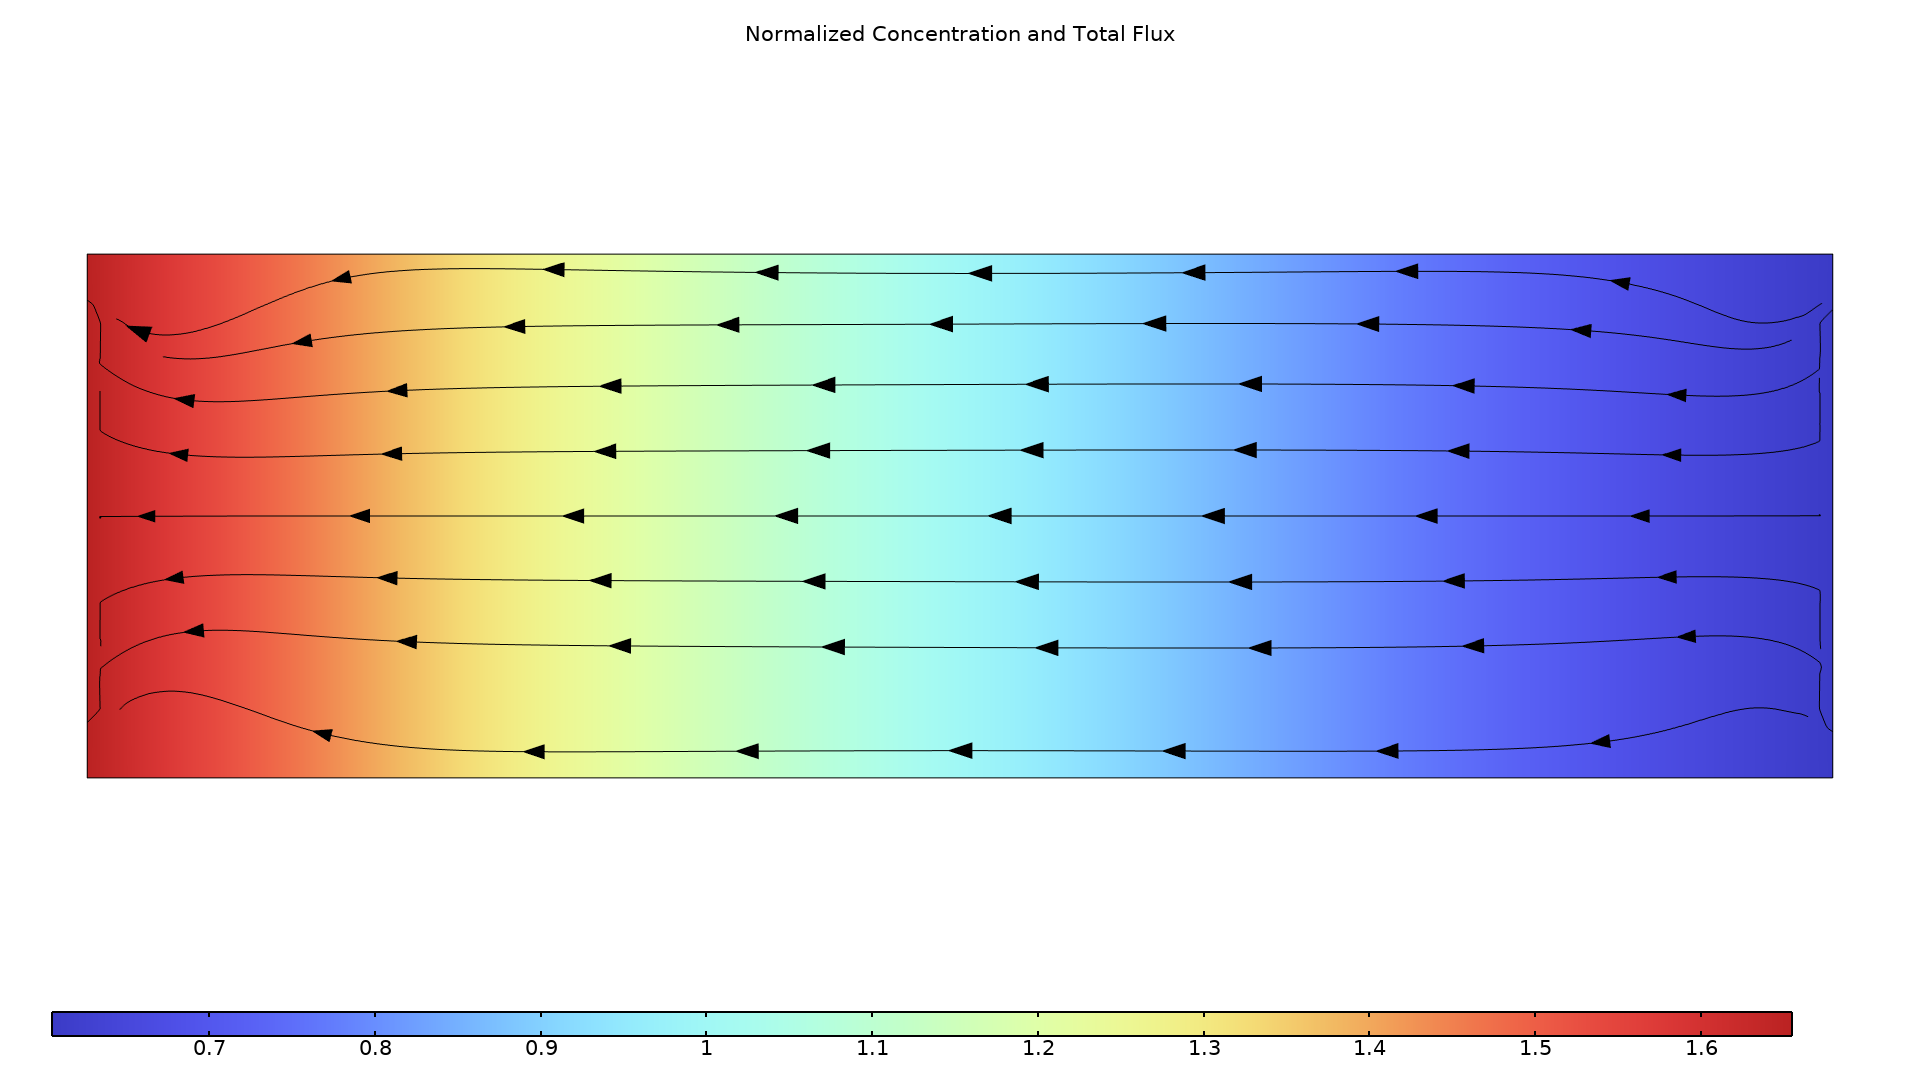 The concentration and total flux within a metal shown in the Rainbow Light color table.